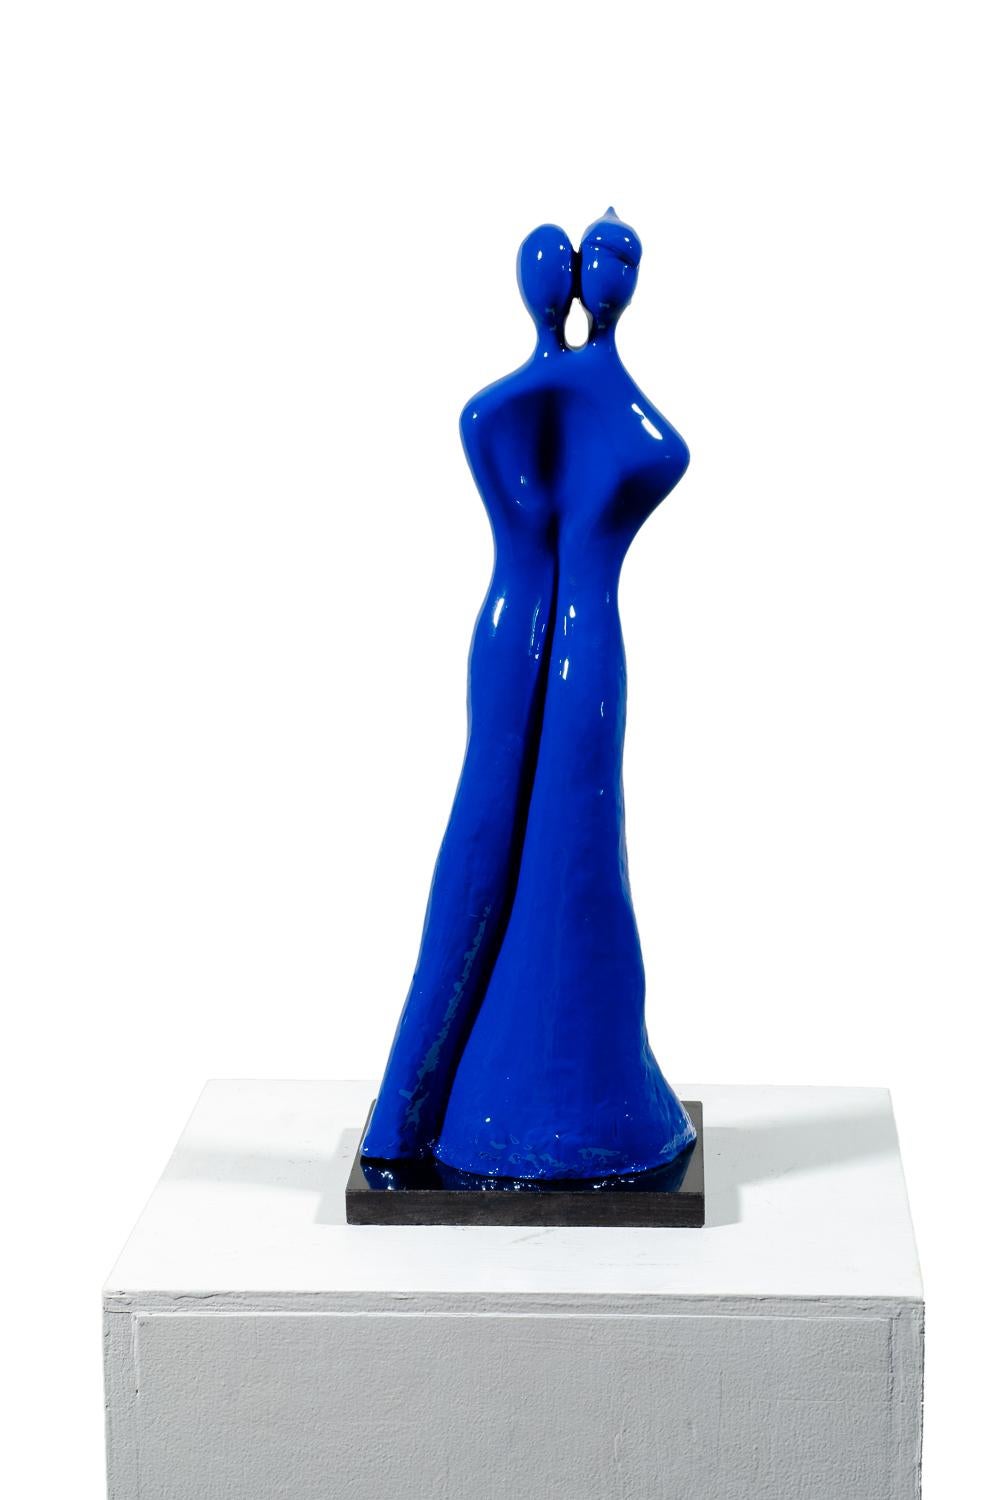 Beatriz Gerenstein Figurative Sculpture - Soul Mates #1 (in blue) When in love, their souls and bodies fuse into just one.